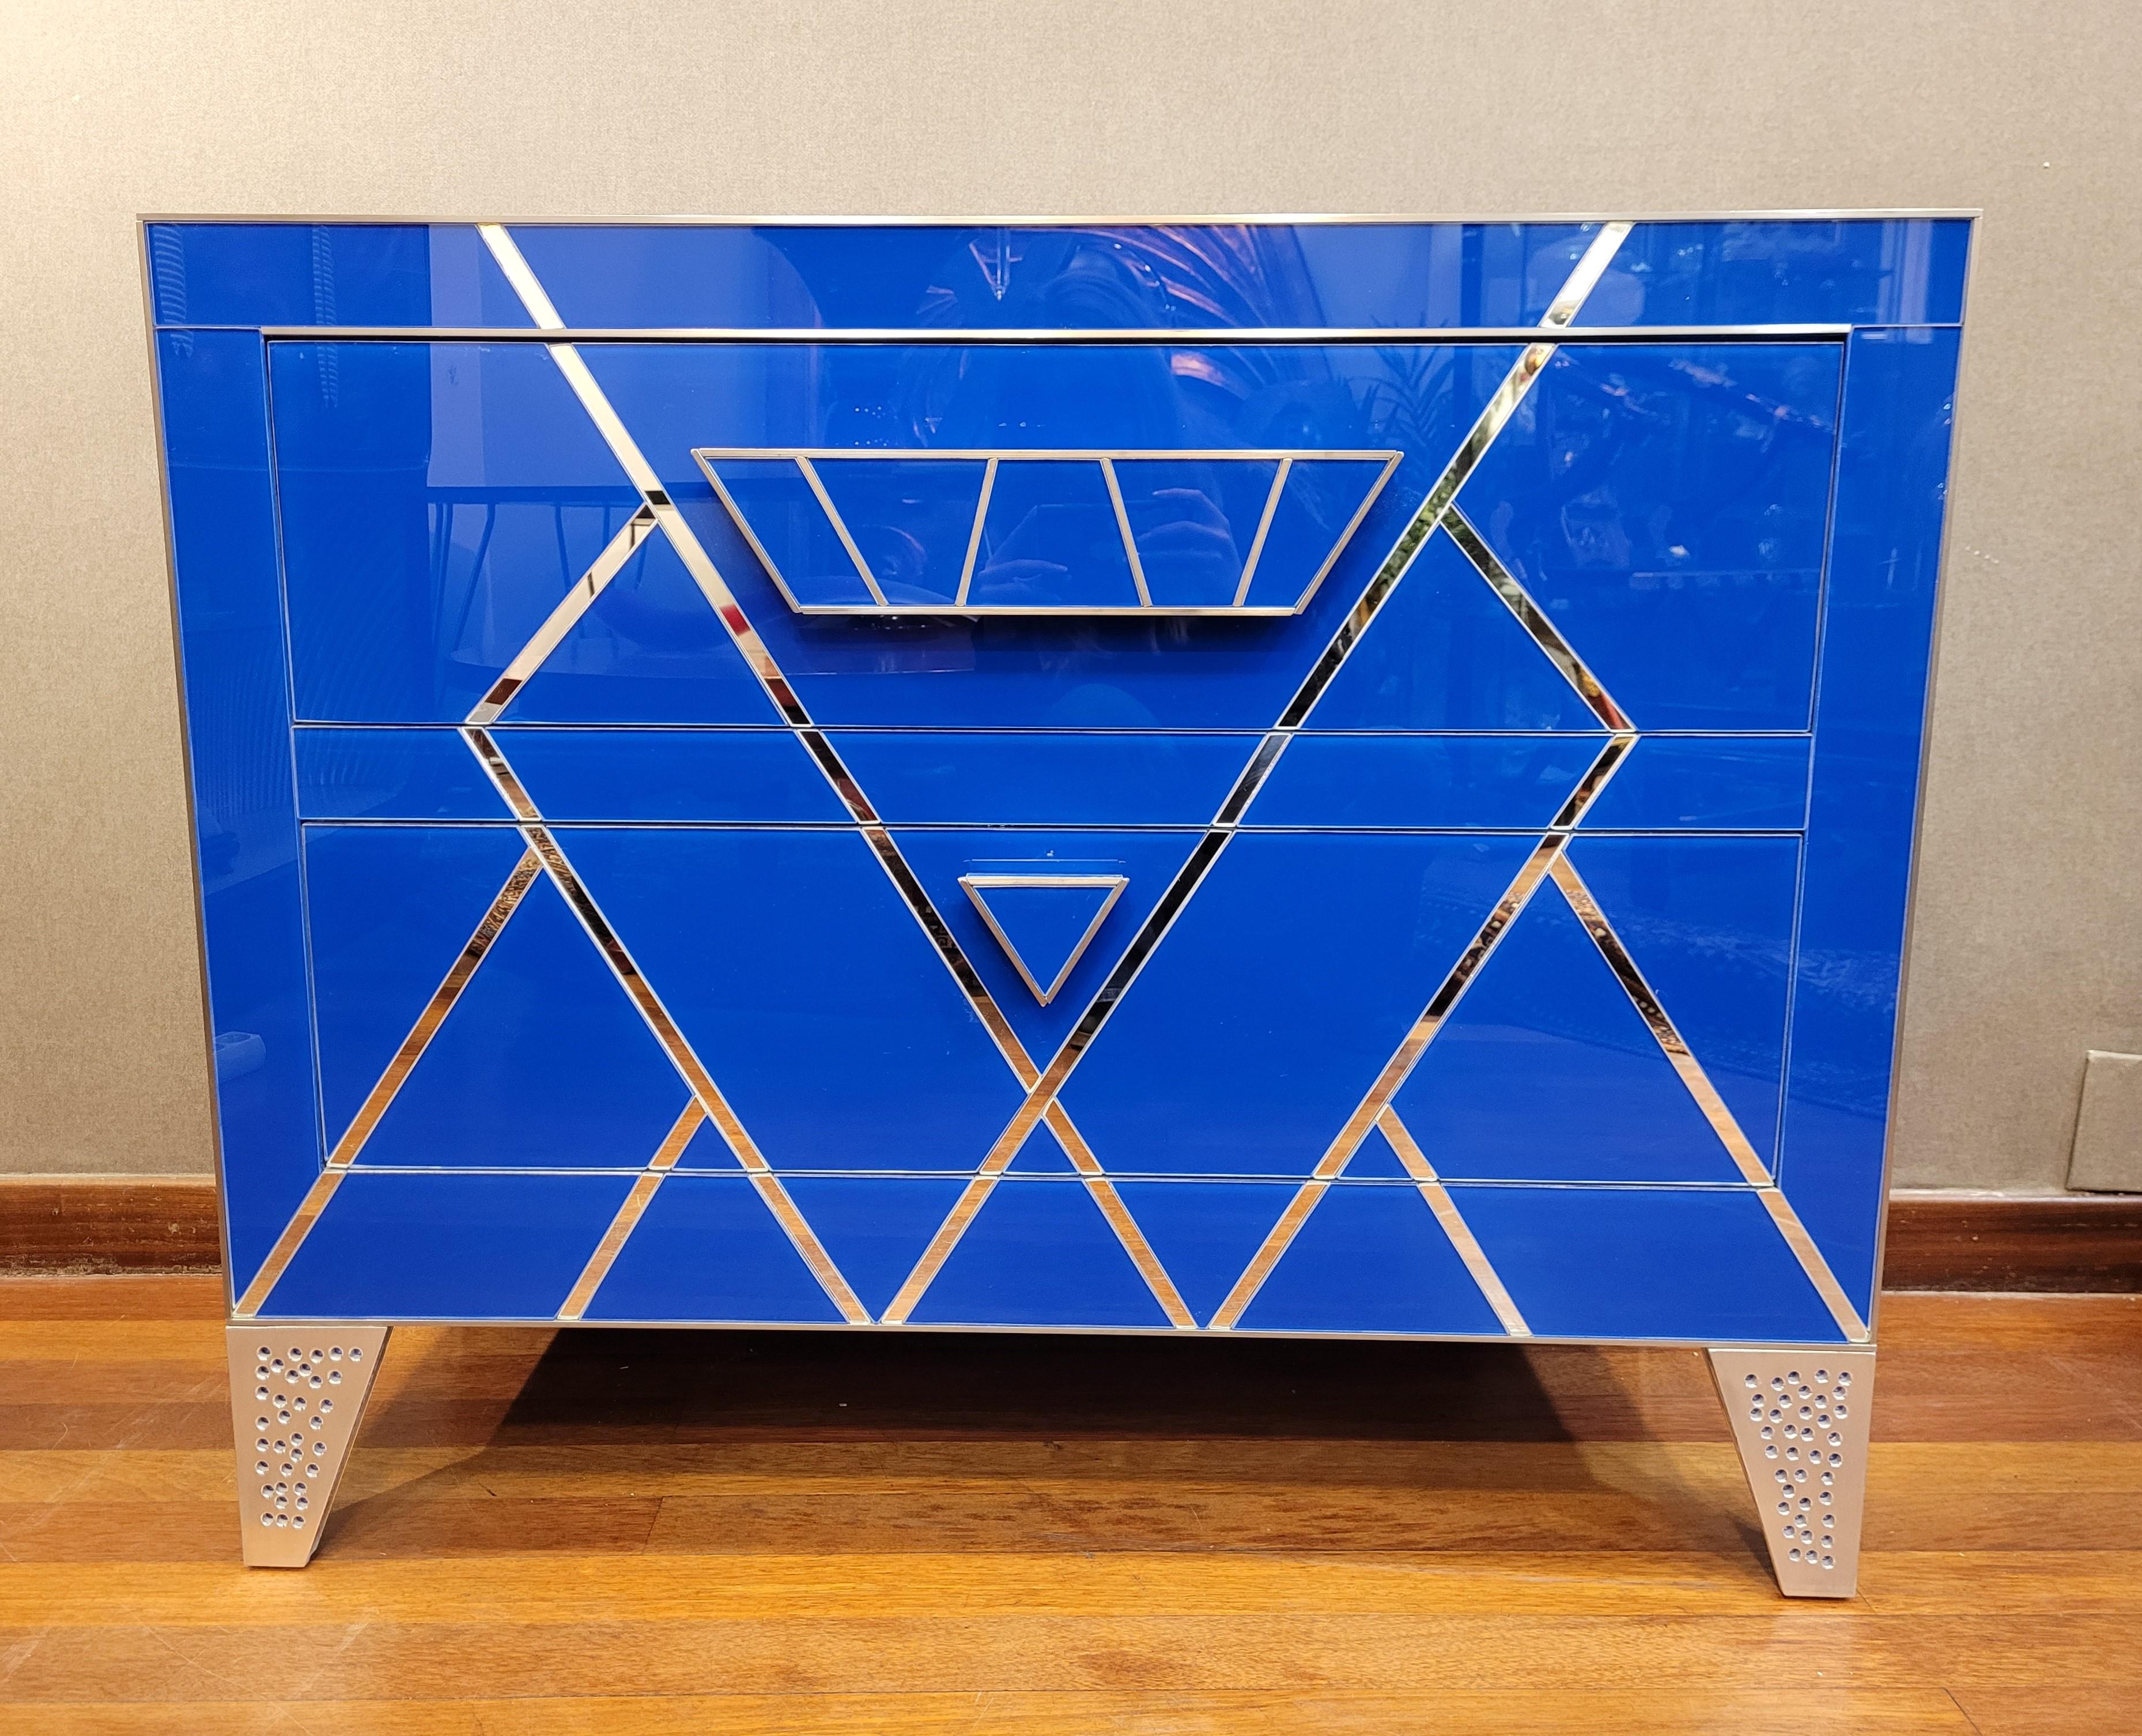 Outstanding pair of chests of drawers made by hand with Italian blue glass plates. Exclusive geometric design, based on triangular shapes and their tangents, which seem to form the silhouette of a diamond on the front. Each chest of drawers is made